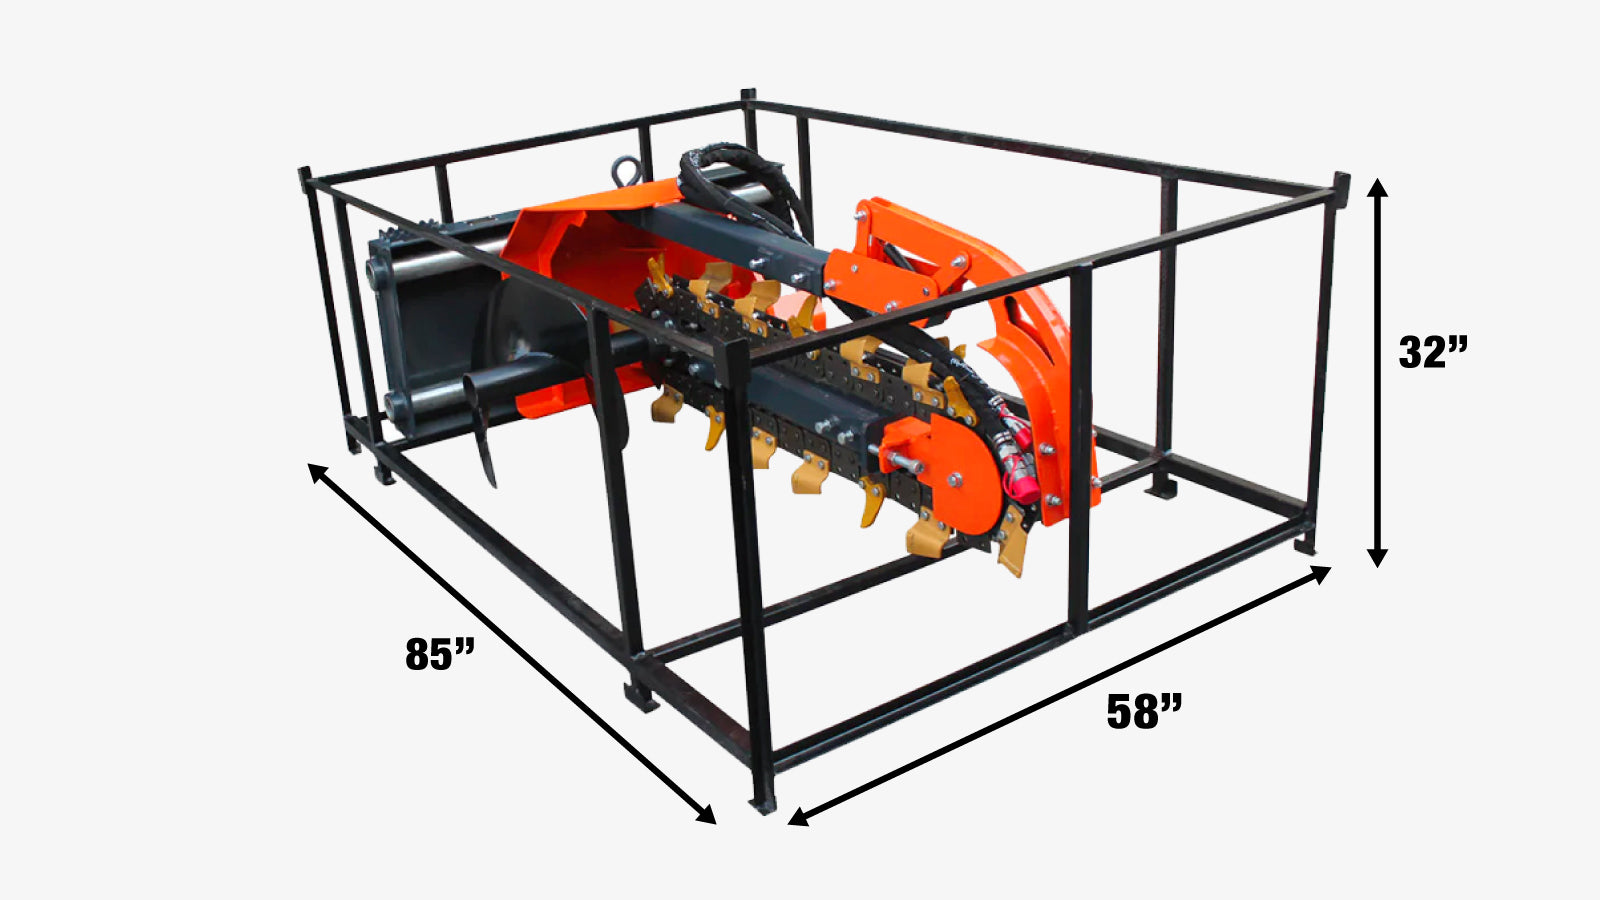 TMG Industrial 36” Skid Steer Side Shift Trencher, 22” Auger Discharge, Boom & Crumber Assembly, Earth Tungsten Teeth, TMG-SDT36S-shipping-info-image